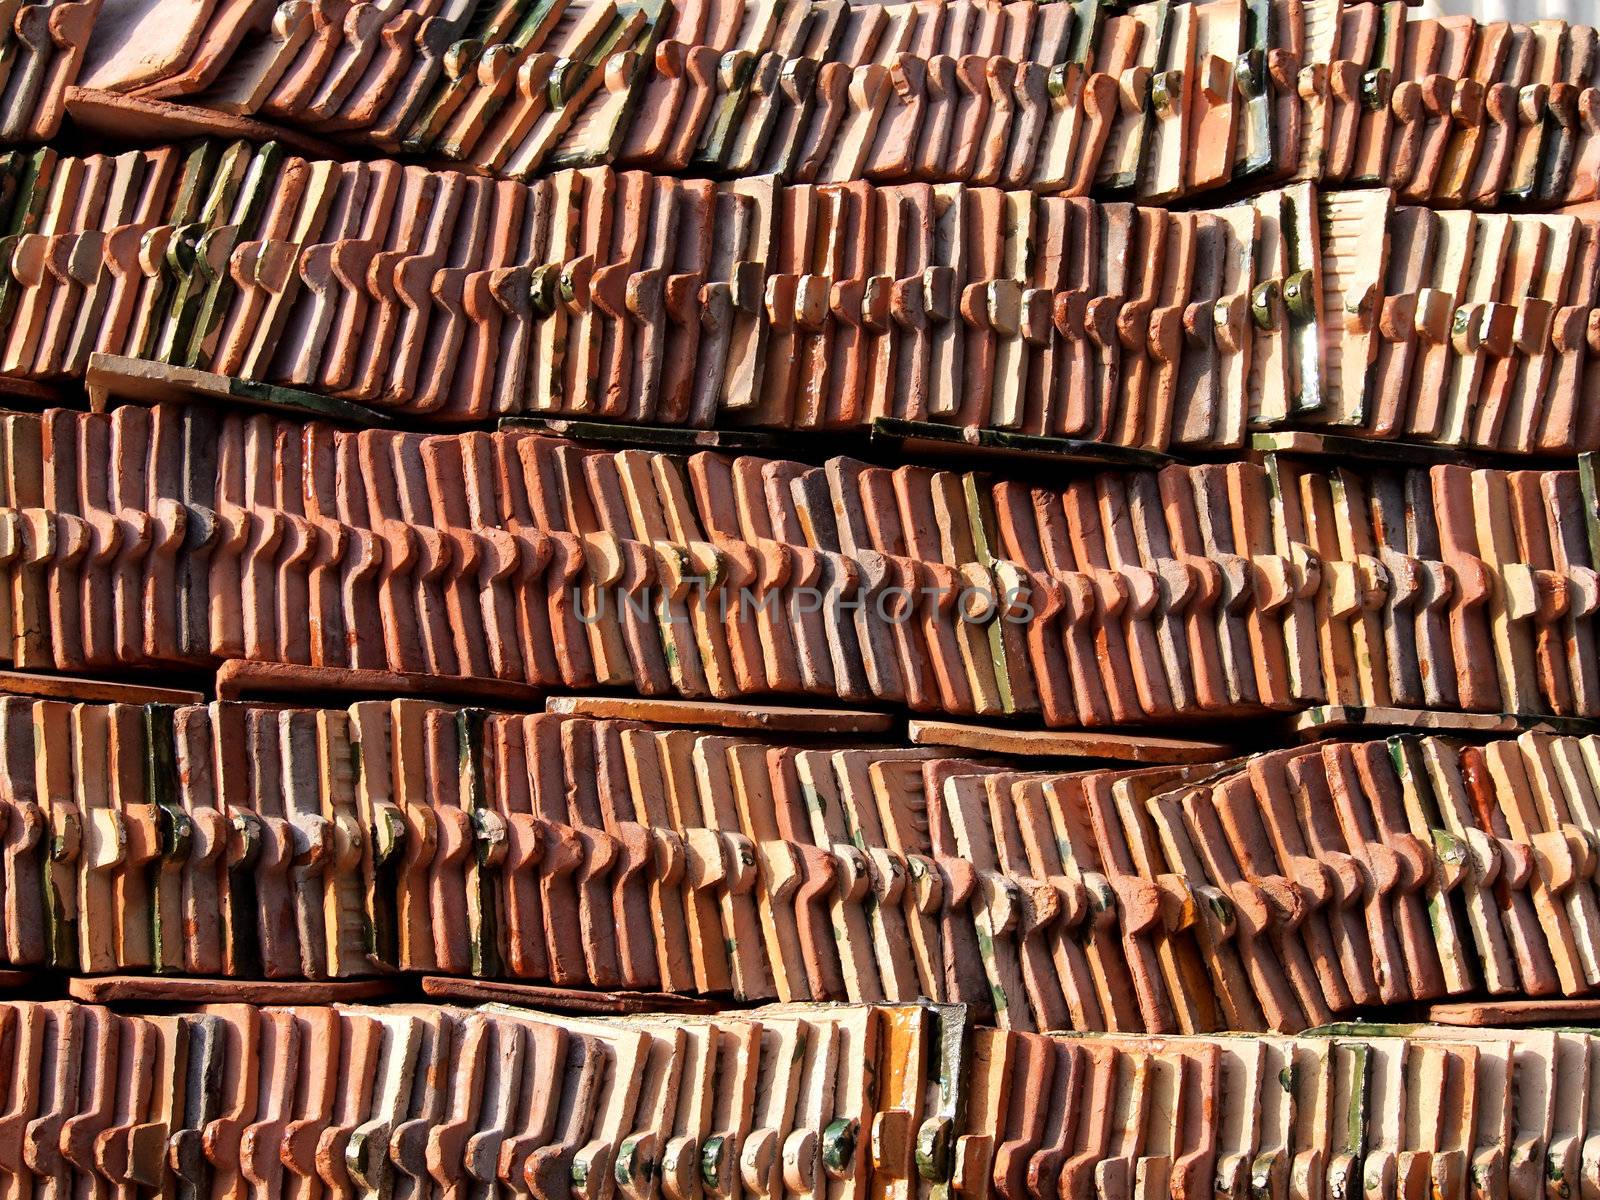 Red Clay Tiles of Thai Roof by siraanamwong